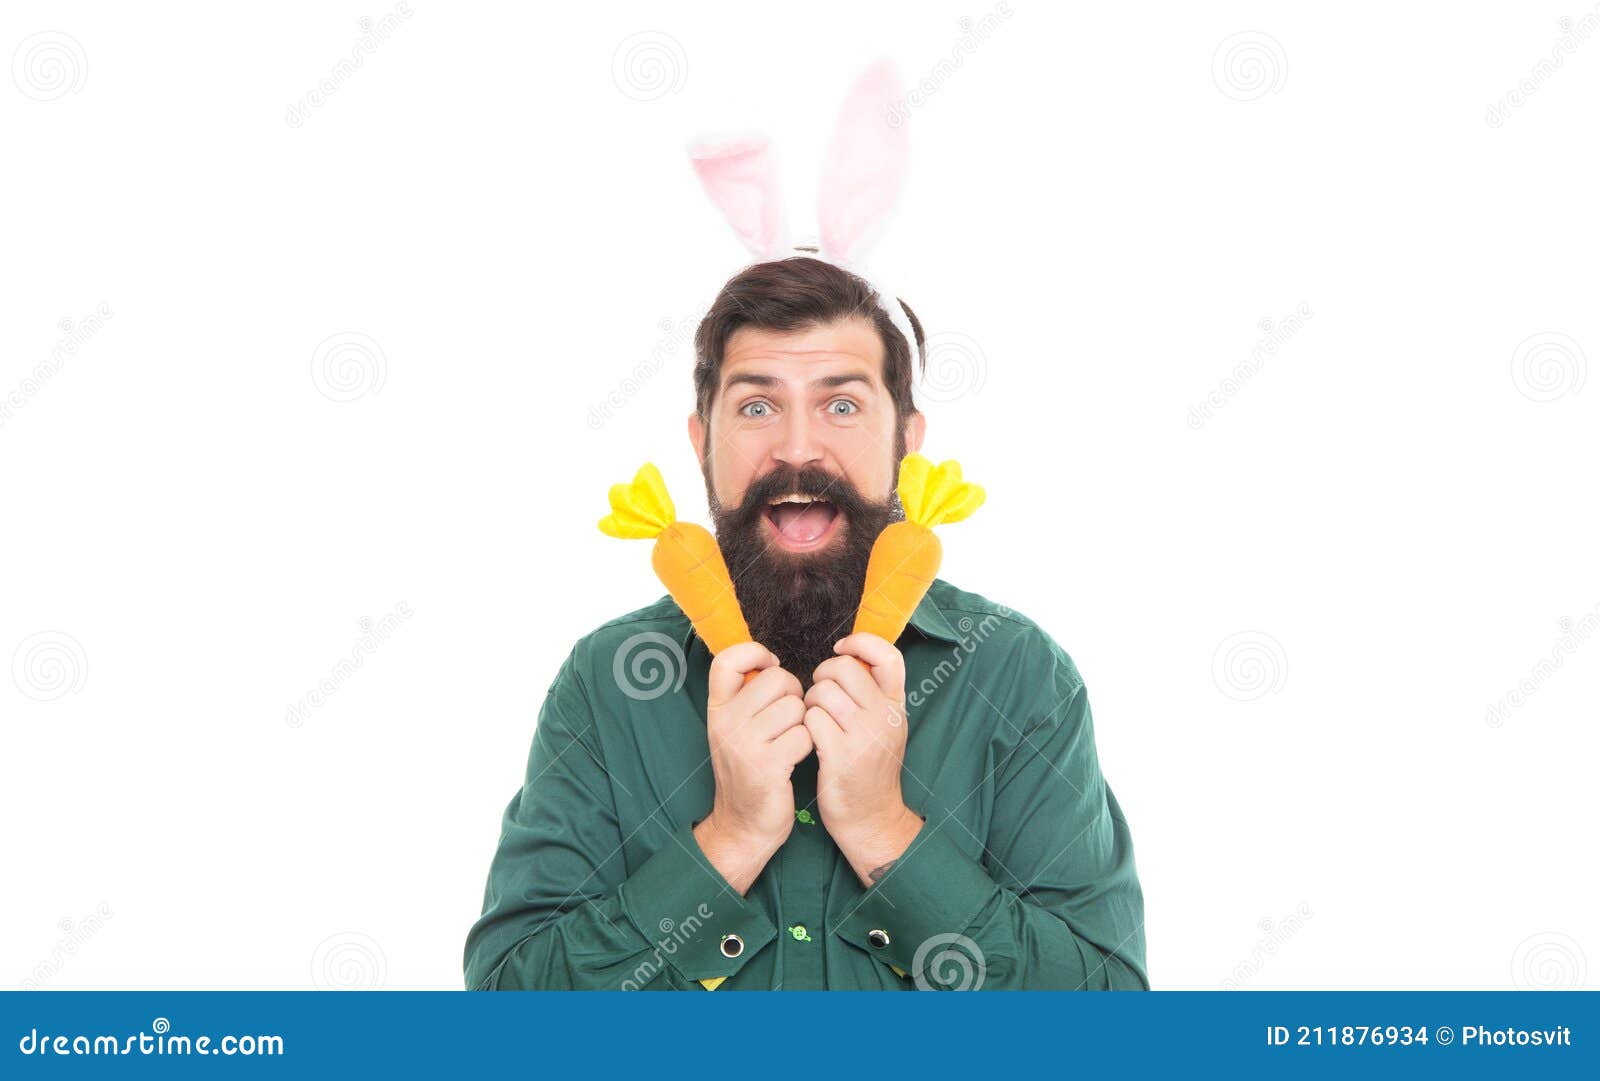 easter surprises. cheerful guy holding carrots. spring holiday greeting. eastertide. surprised man